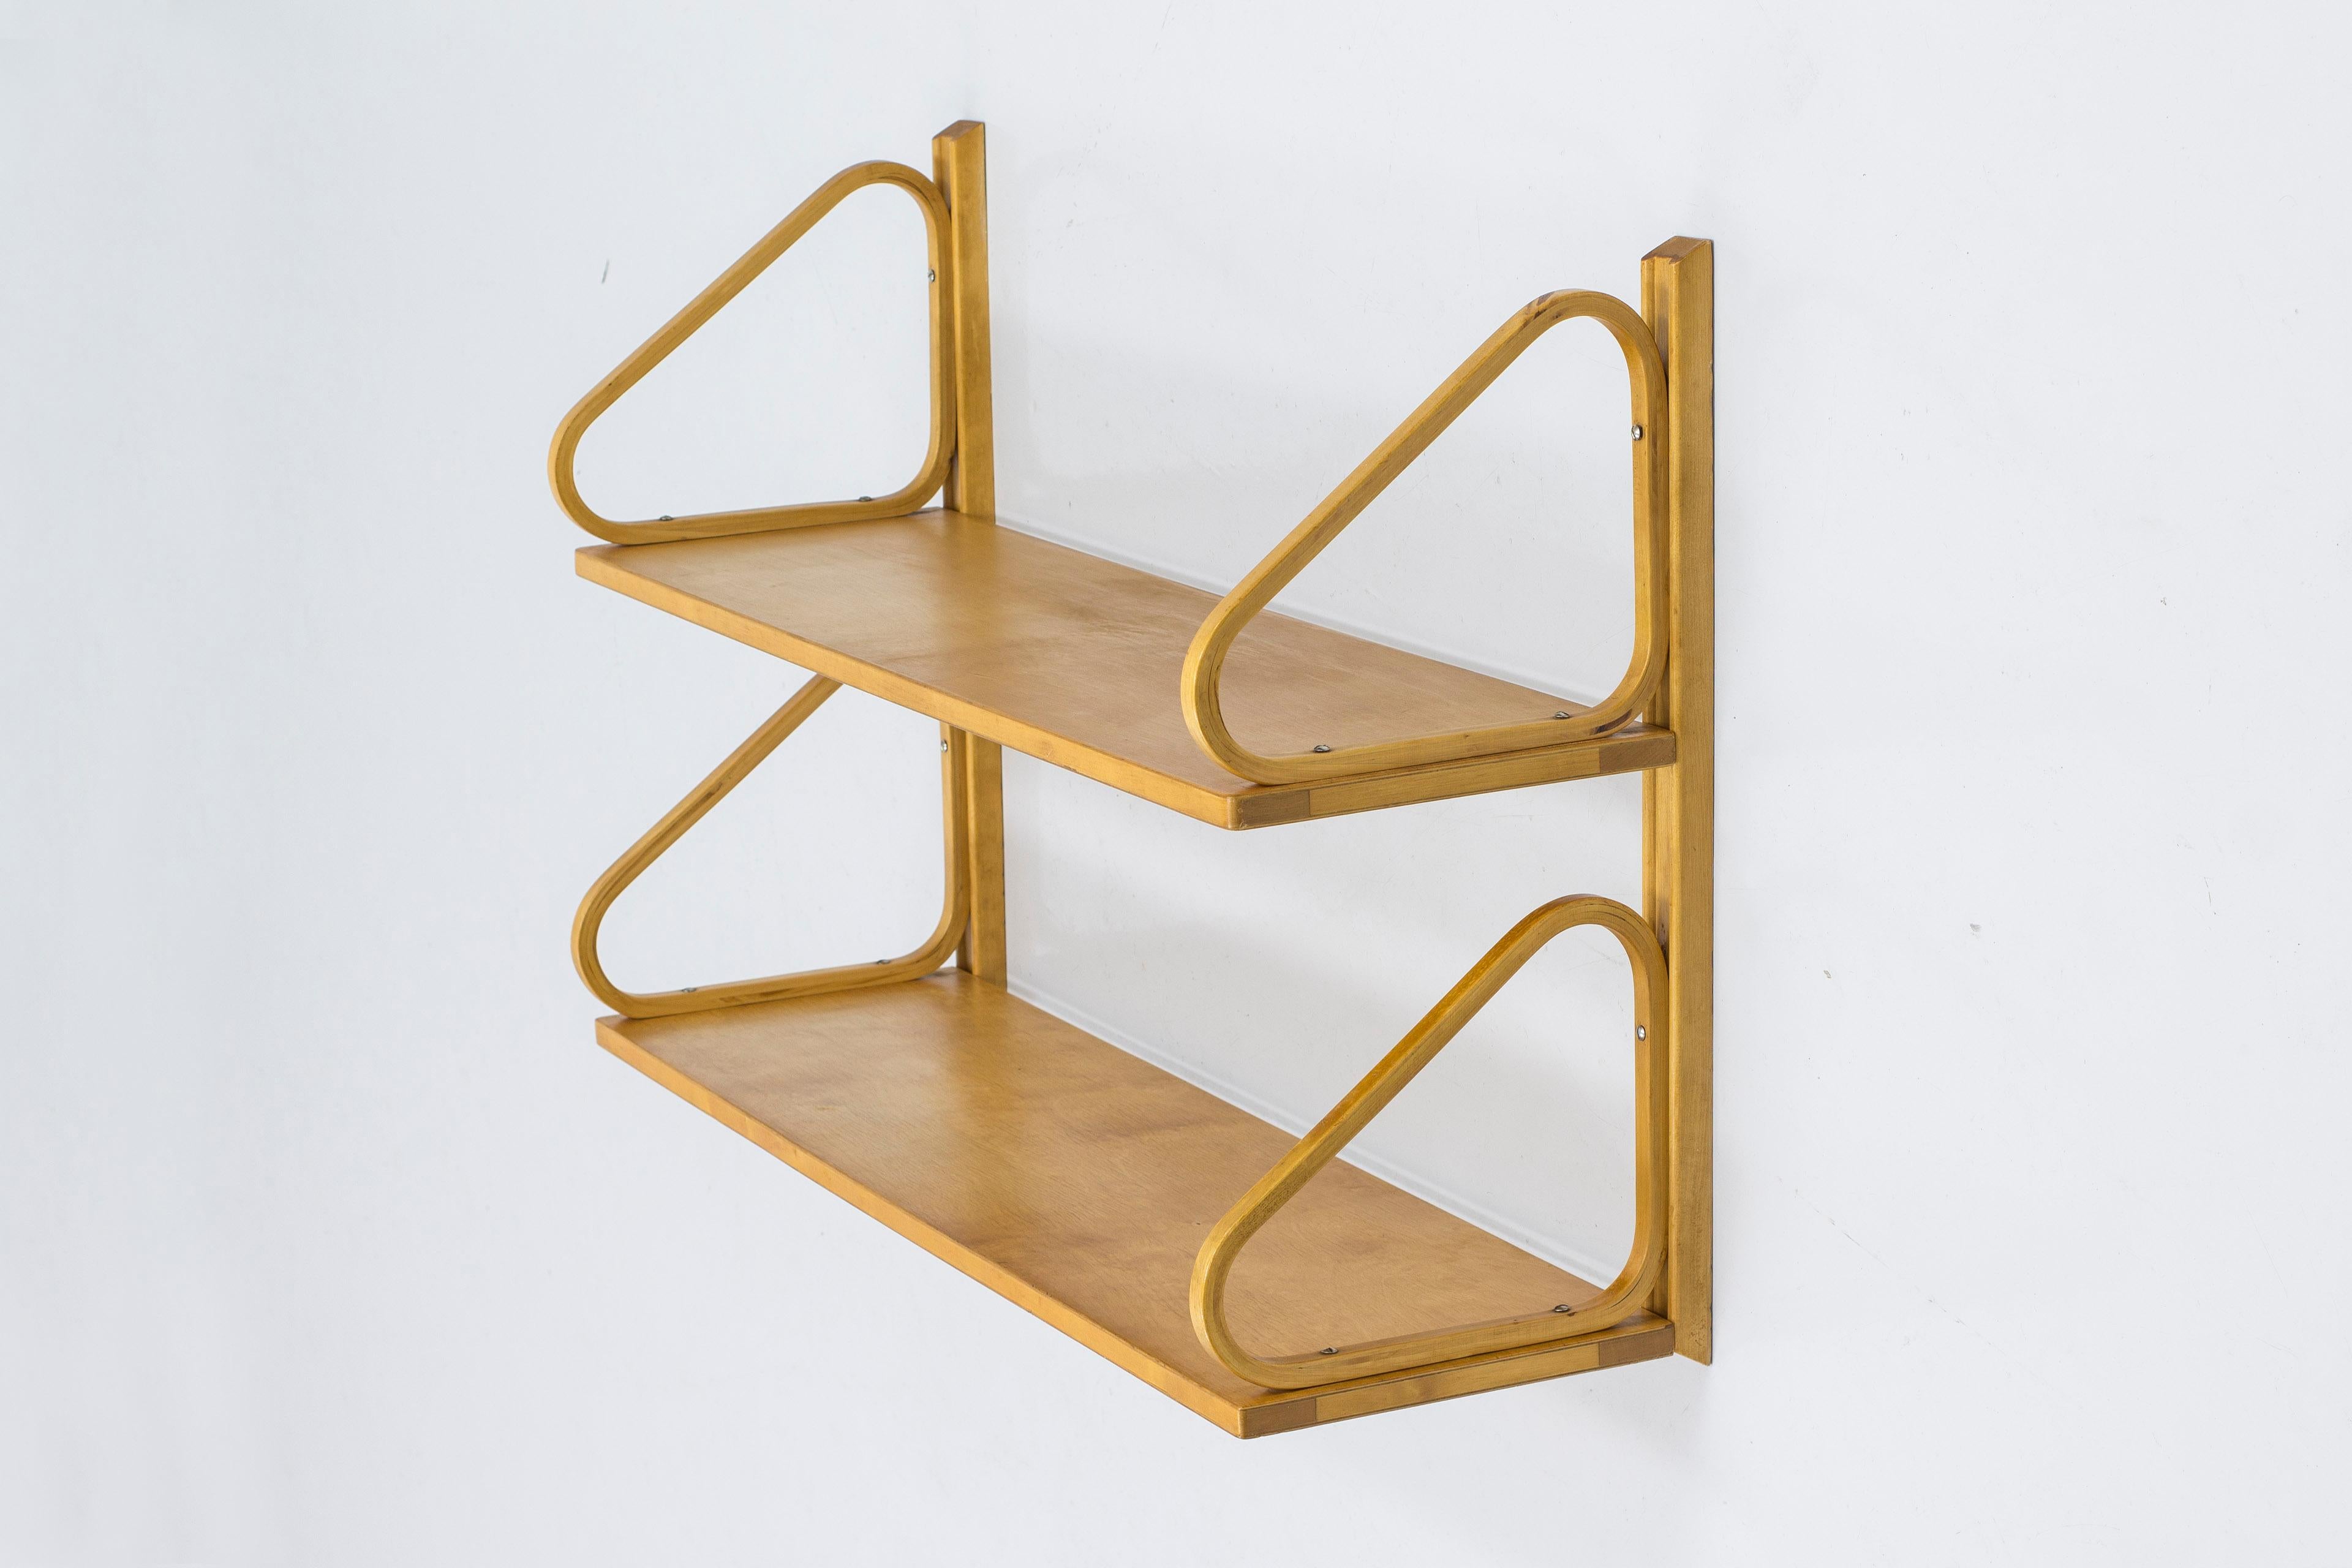 Wall shelf designed by Alvar Aalto. Produced by Svenska Artek in Hedemora, Sweden. Made between 1946-1956. Mad from solid and laminated birch throughout. Beautiful honey toned color from age and patina. The shelf comes with original wall mount but